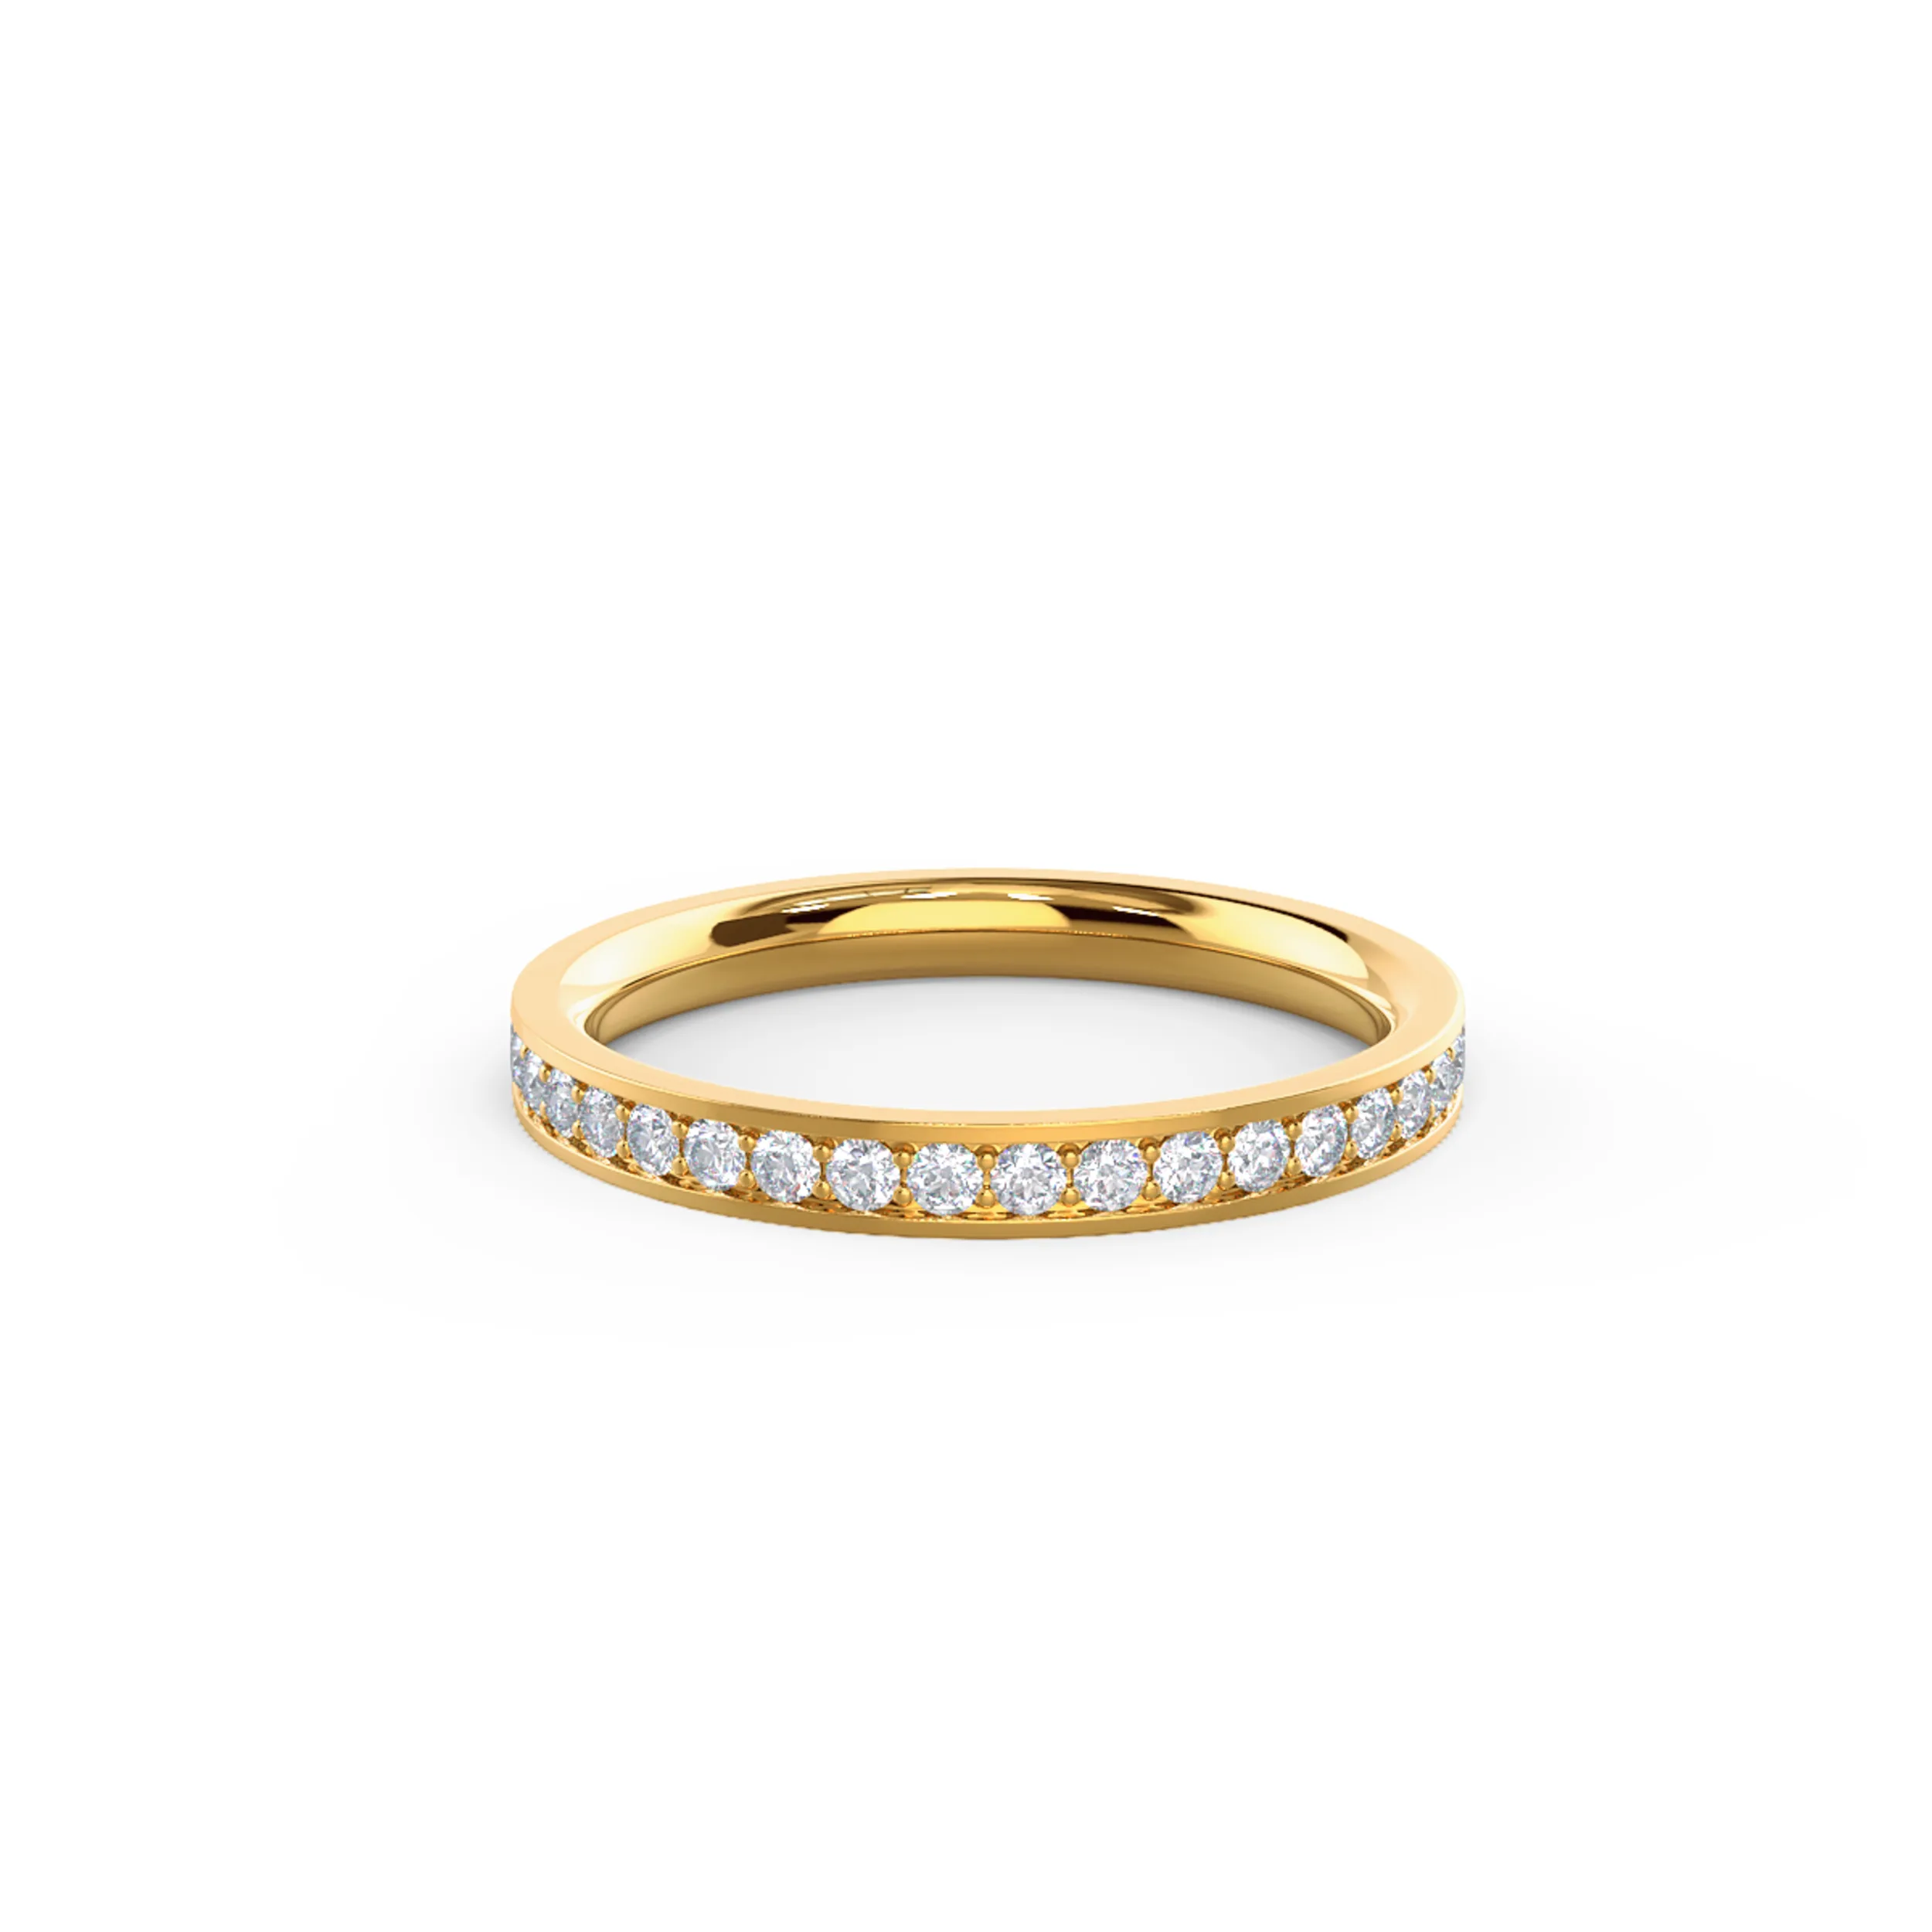 Exceptional Quality 0.45 ct Round Lab Diamonds Channel Set Three Quarter Band in 14k Yellow Gold (Main View)